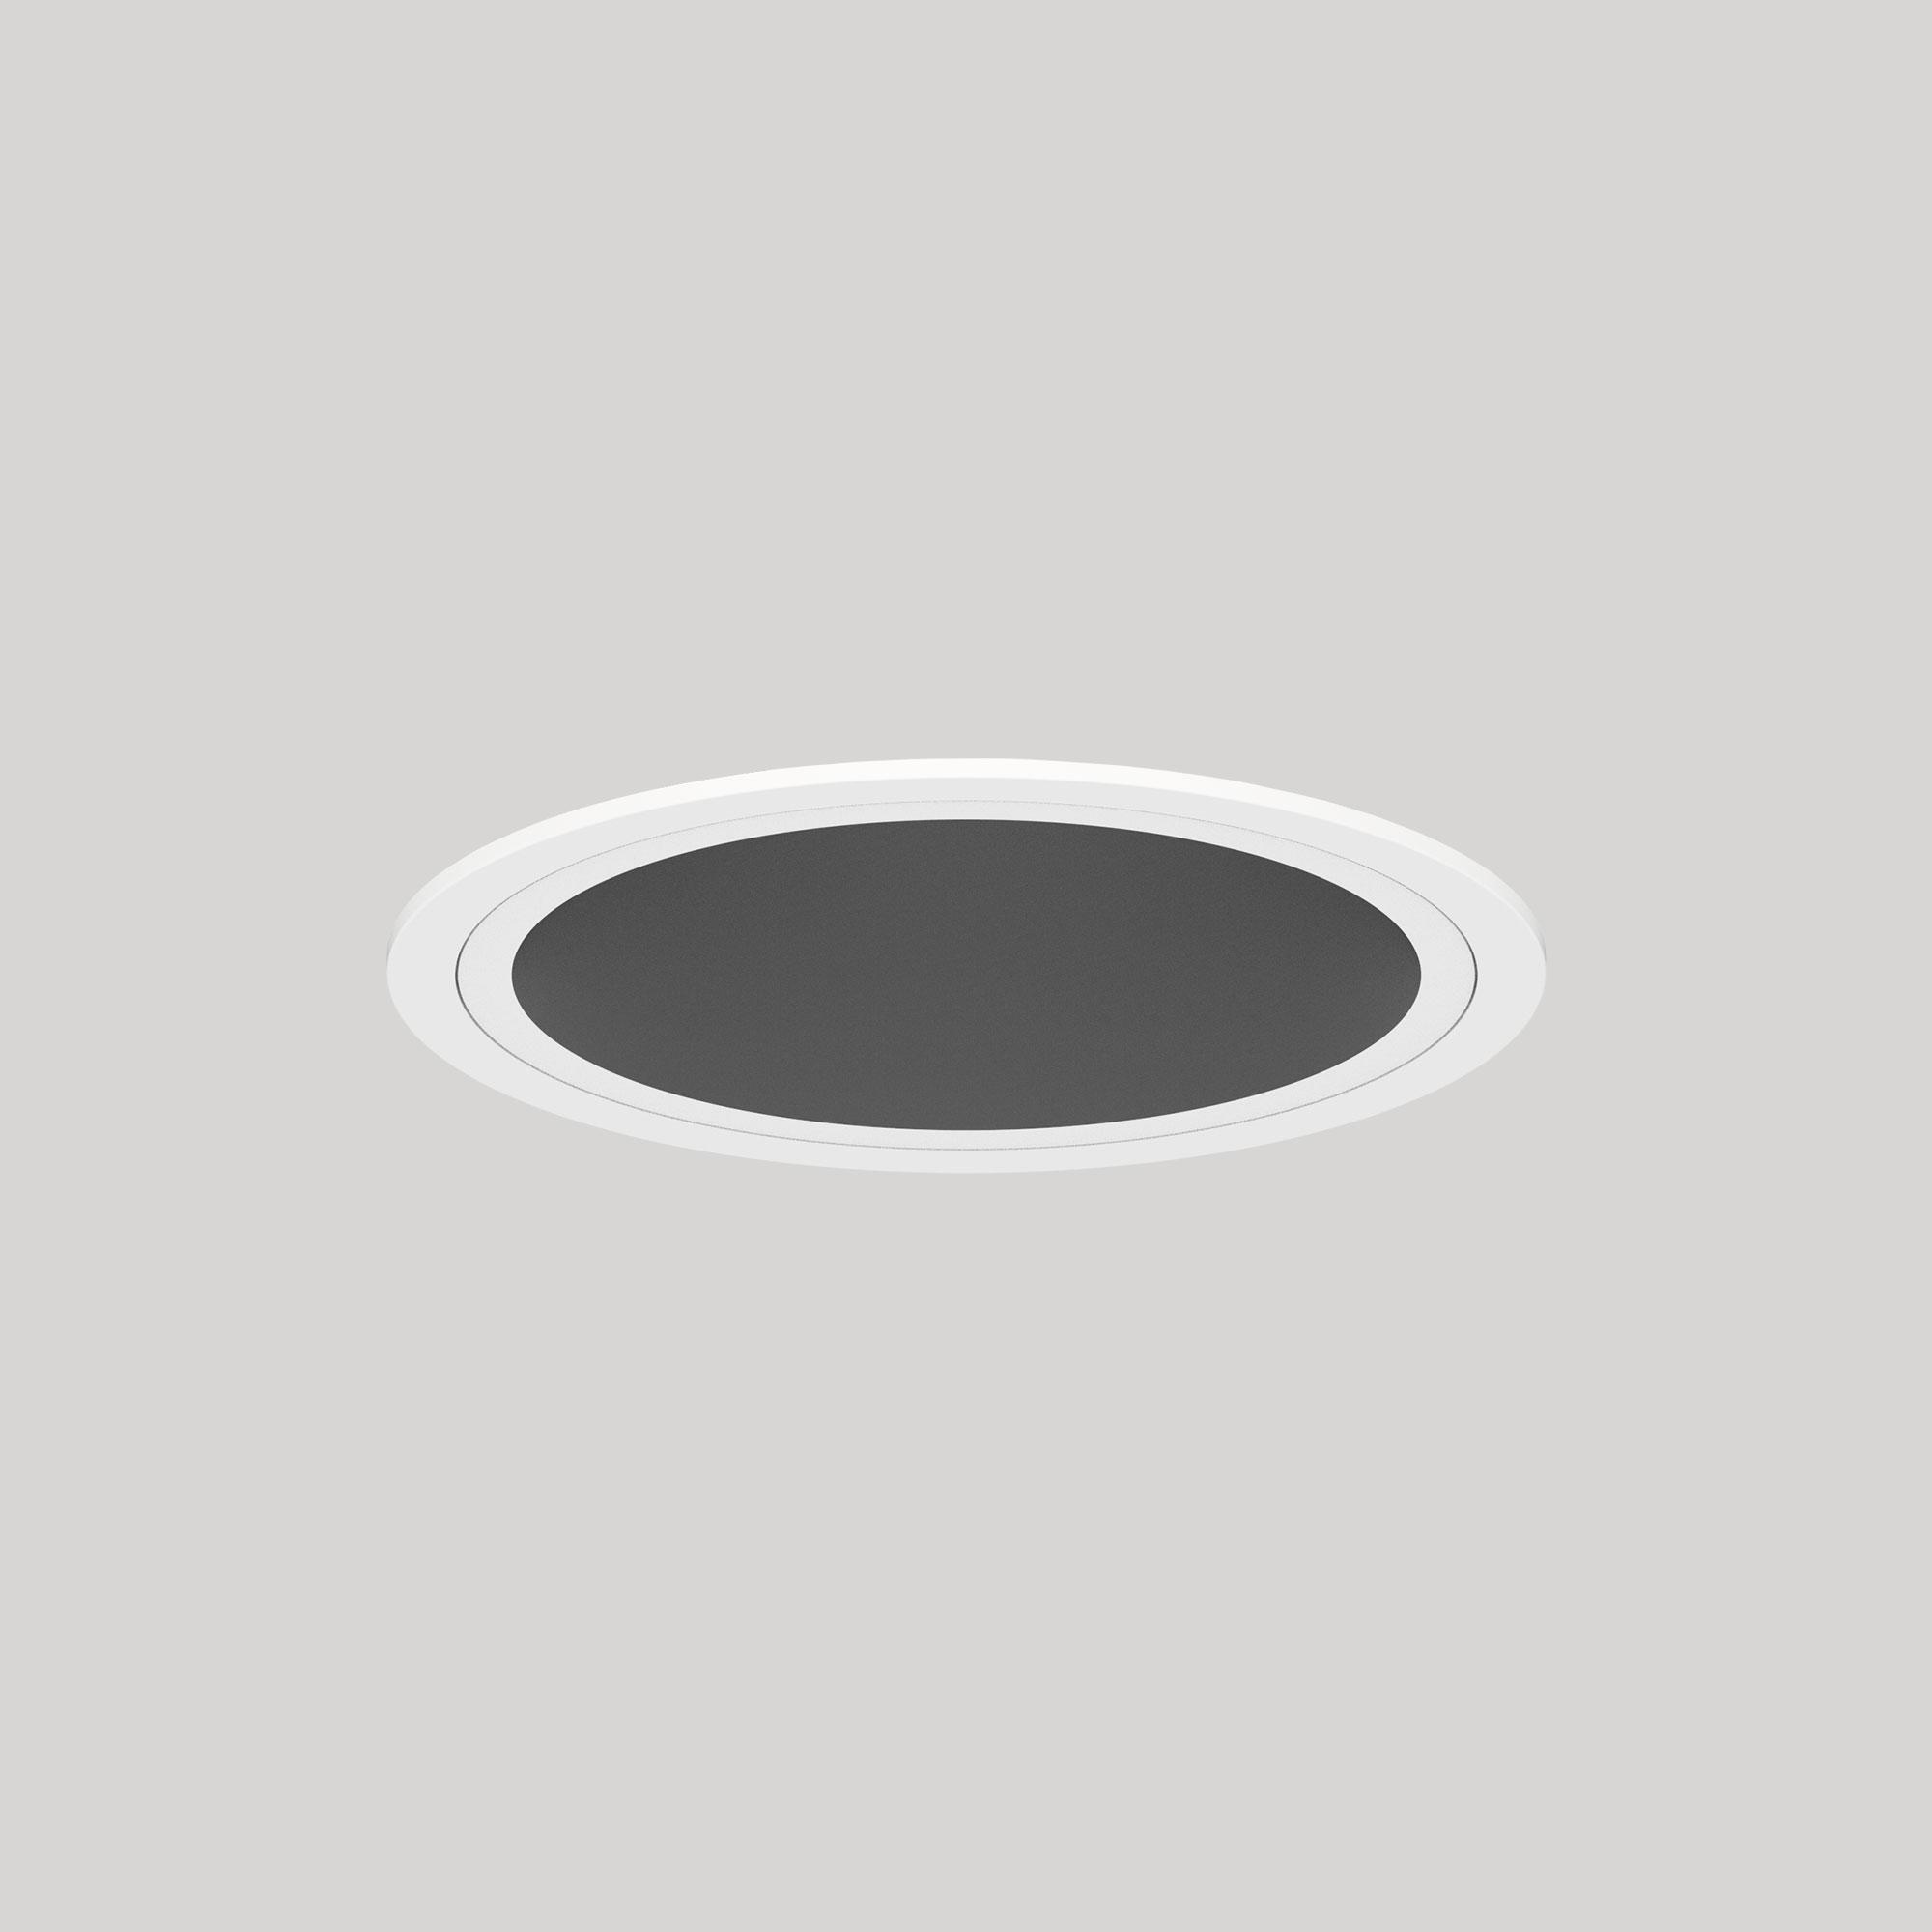 Standard 114mm Ceiling Recessed Round Fixed STD-E01C2J-WBP - Standard-STD-E01-WB-Installed.jpg